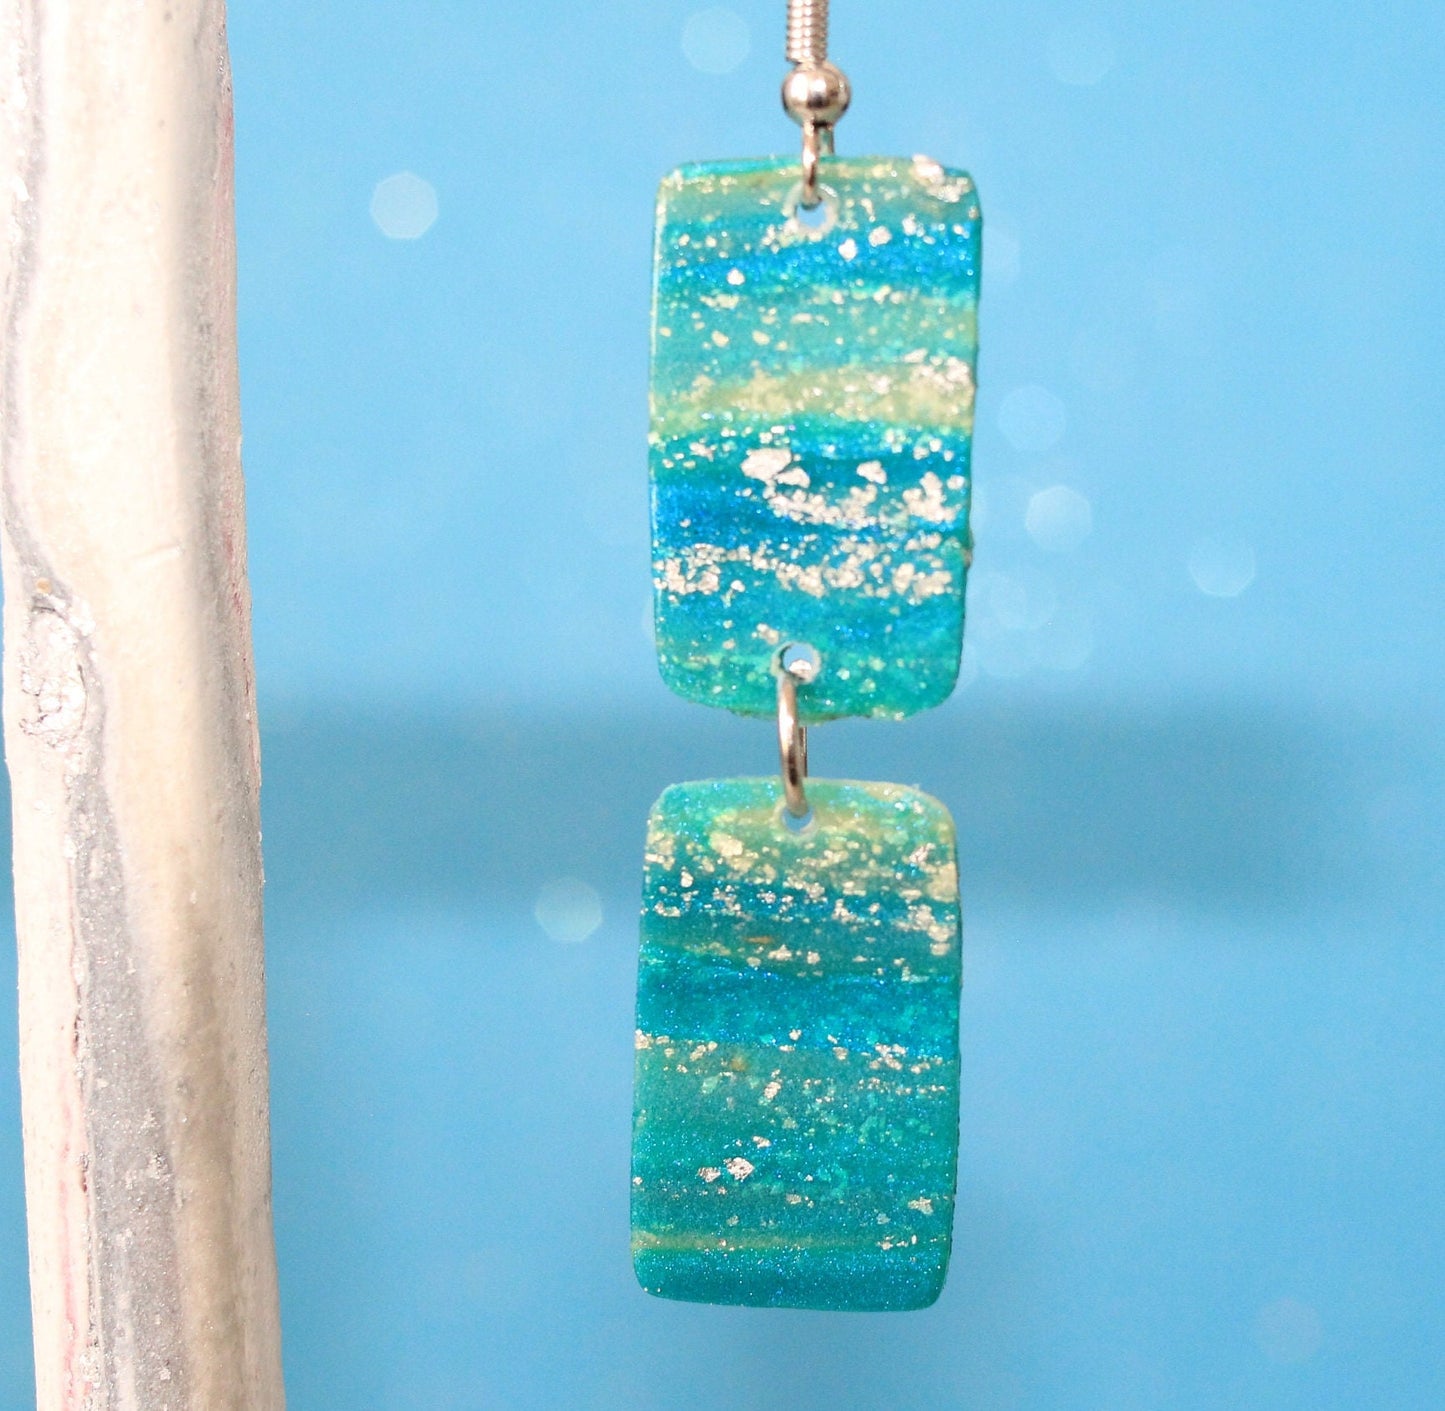 Turquoise Blue & Transparent White Polymer Clay Drop Earrings w/Silver Foil Accent - Variant 3